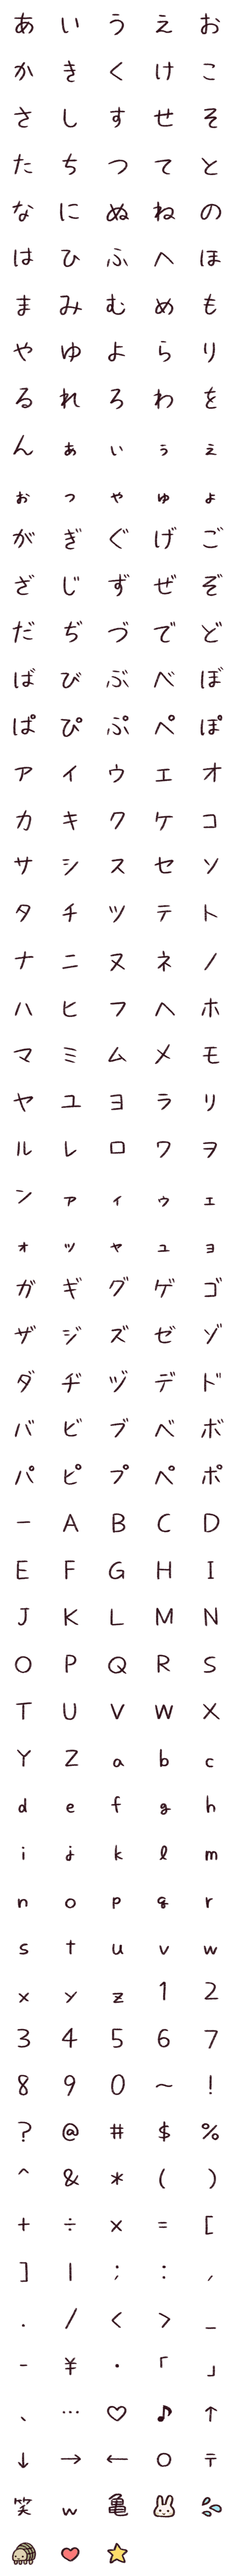 [LINE絵文字]手書きフォントの画像一覧